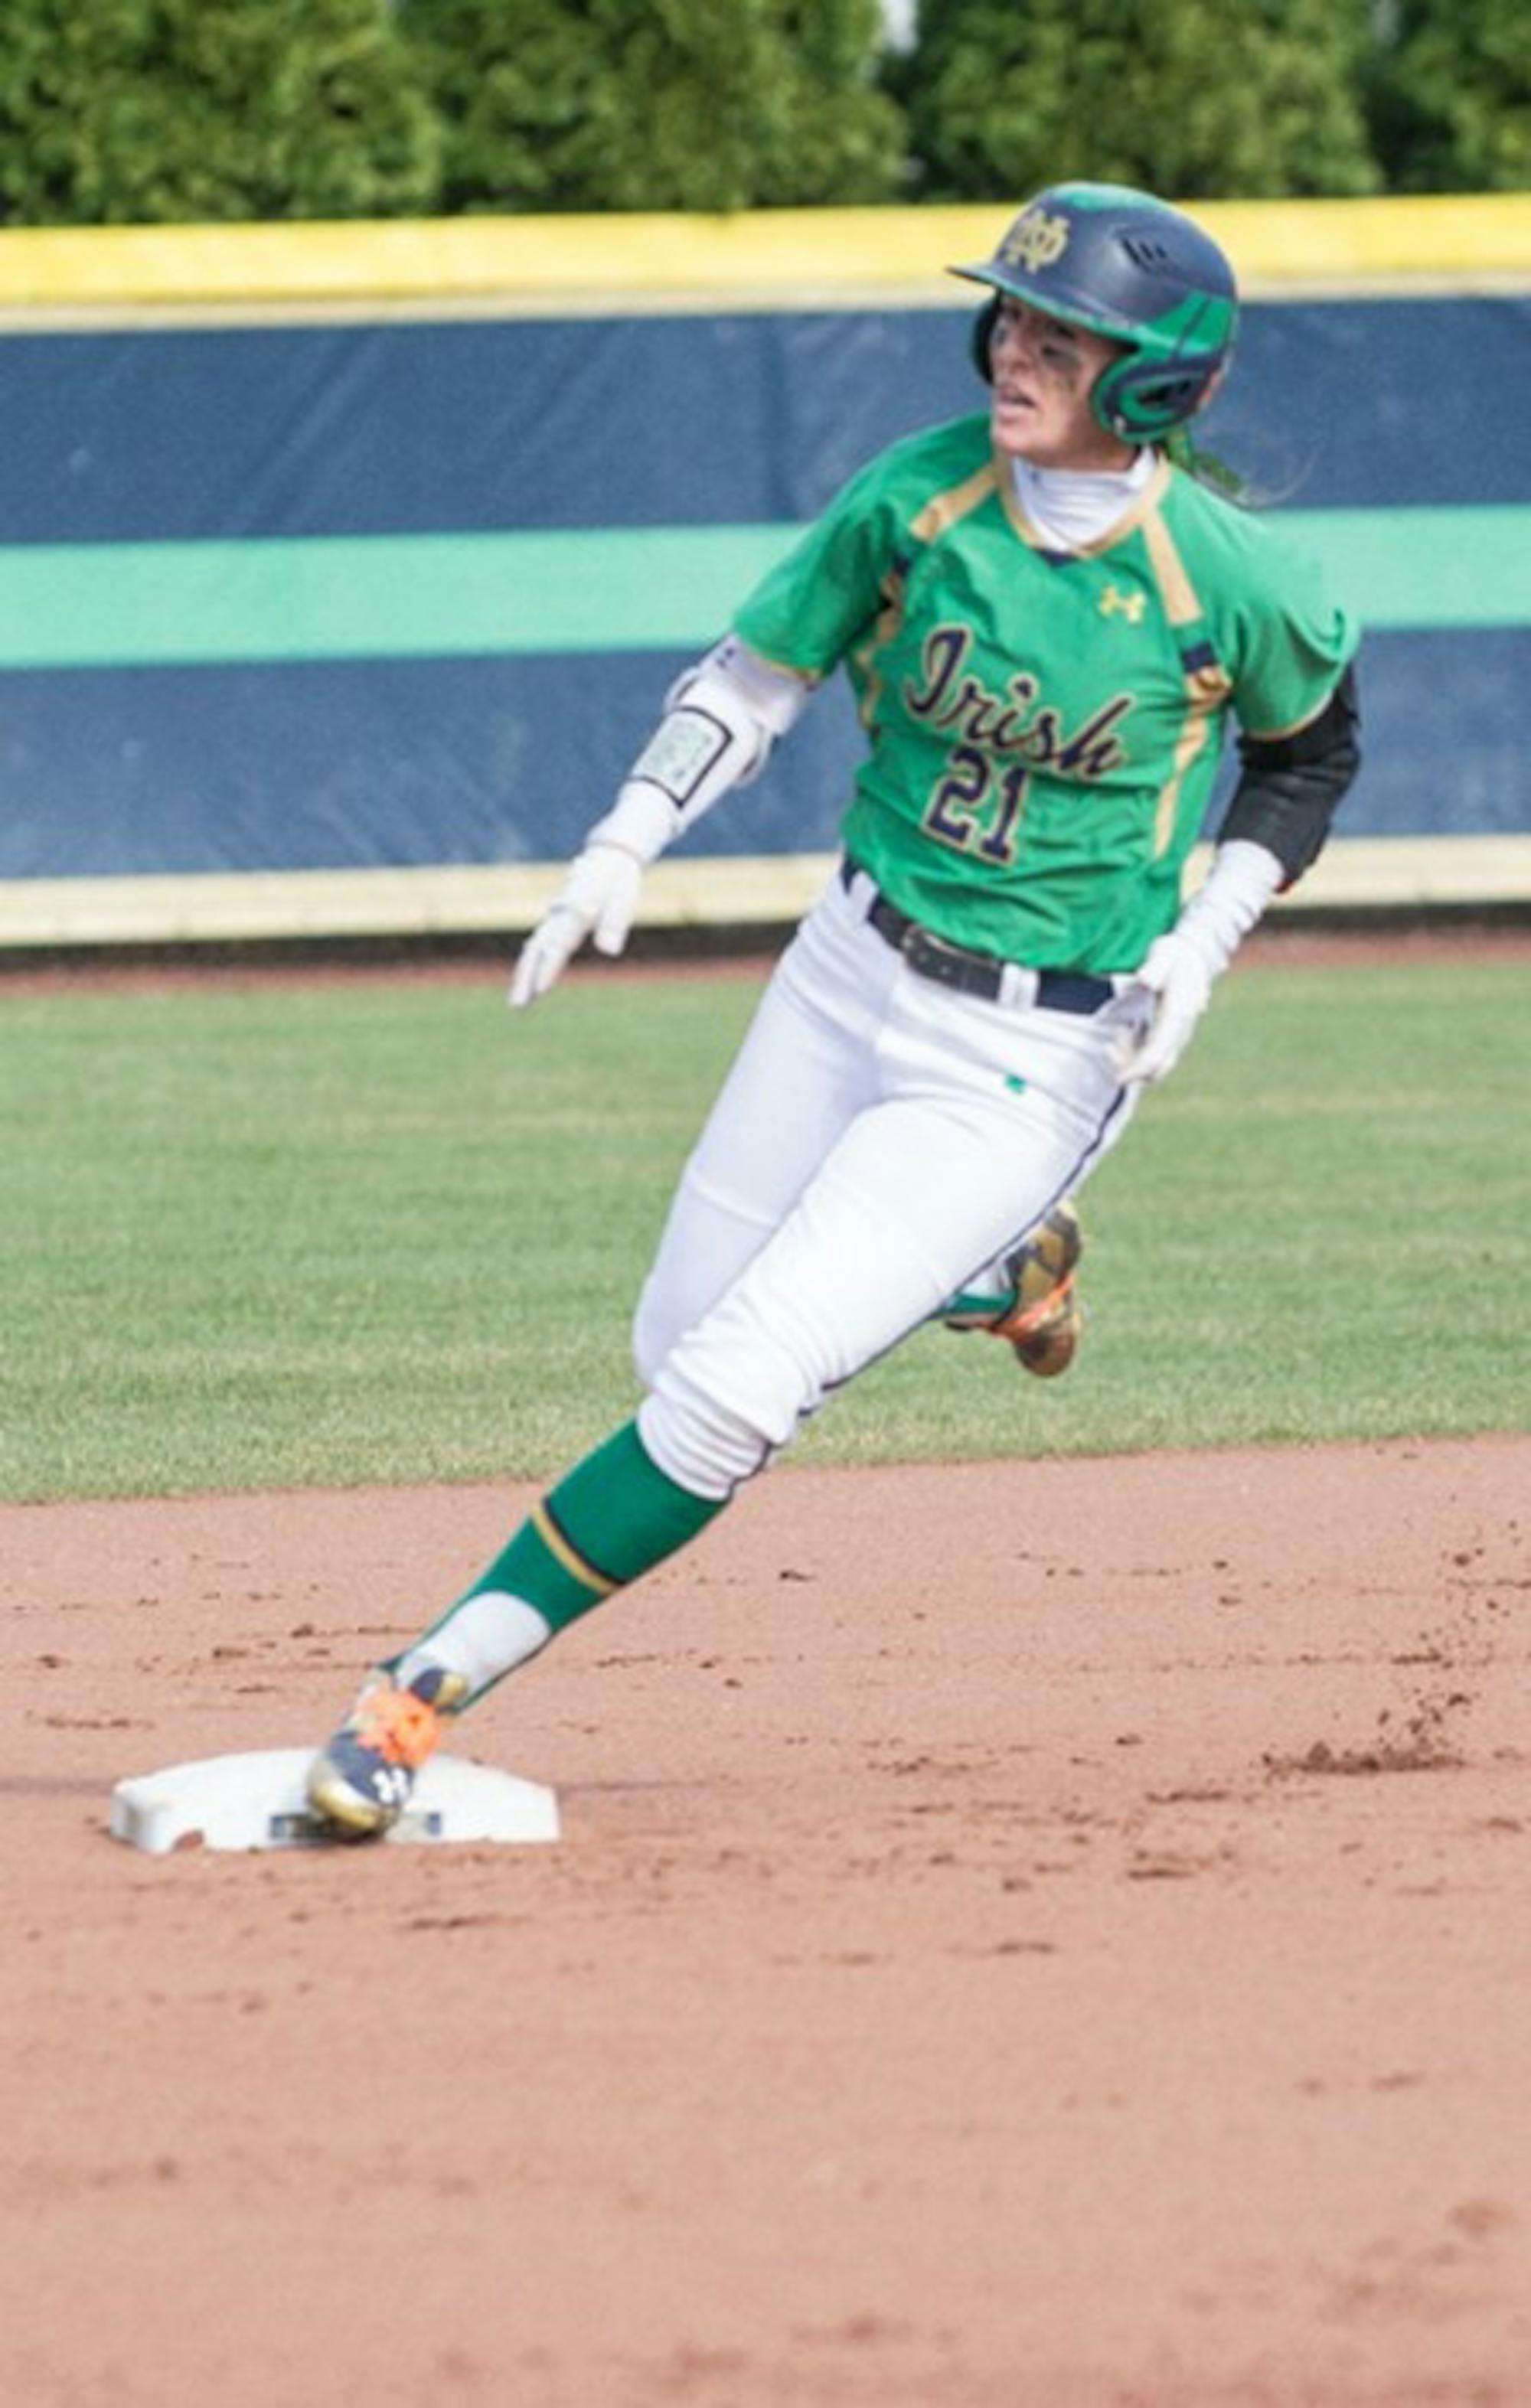 Senior outfielder Karley Wester rounds second base during Notre Dame’s 15-4 loss to Florida State on March 4, 2016.